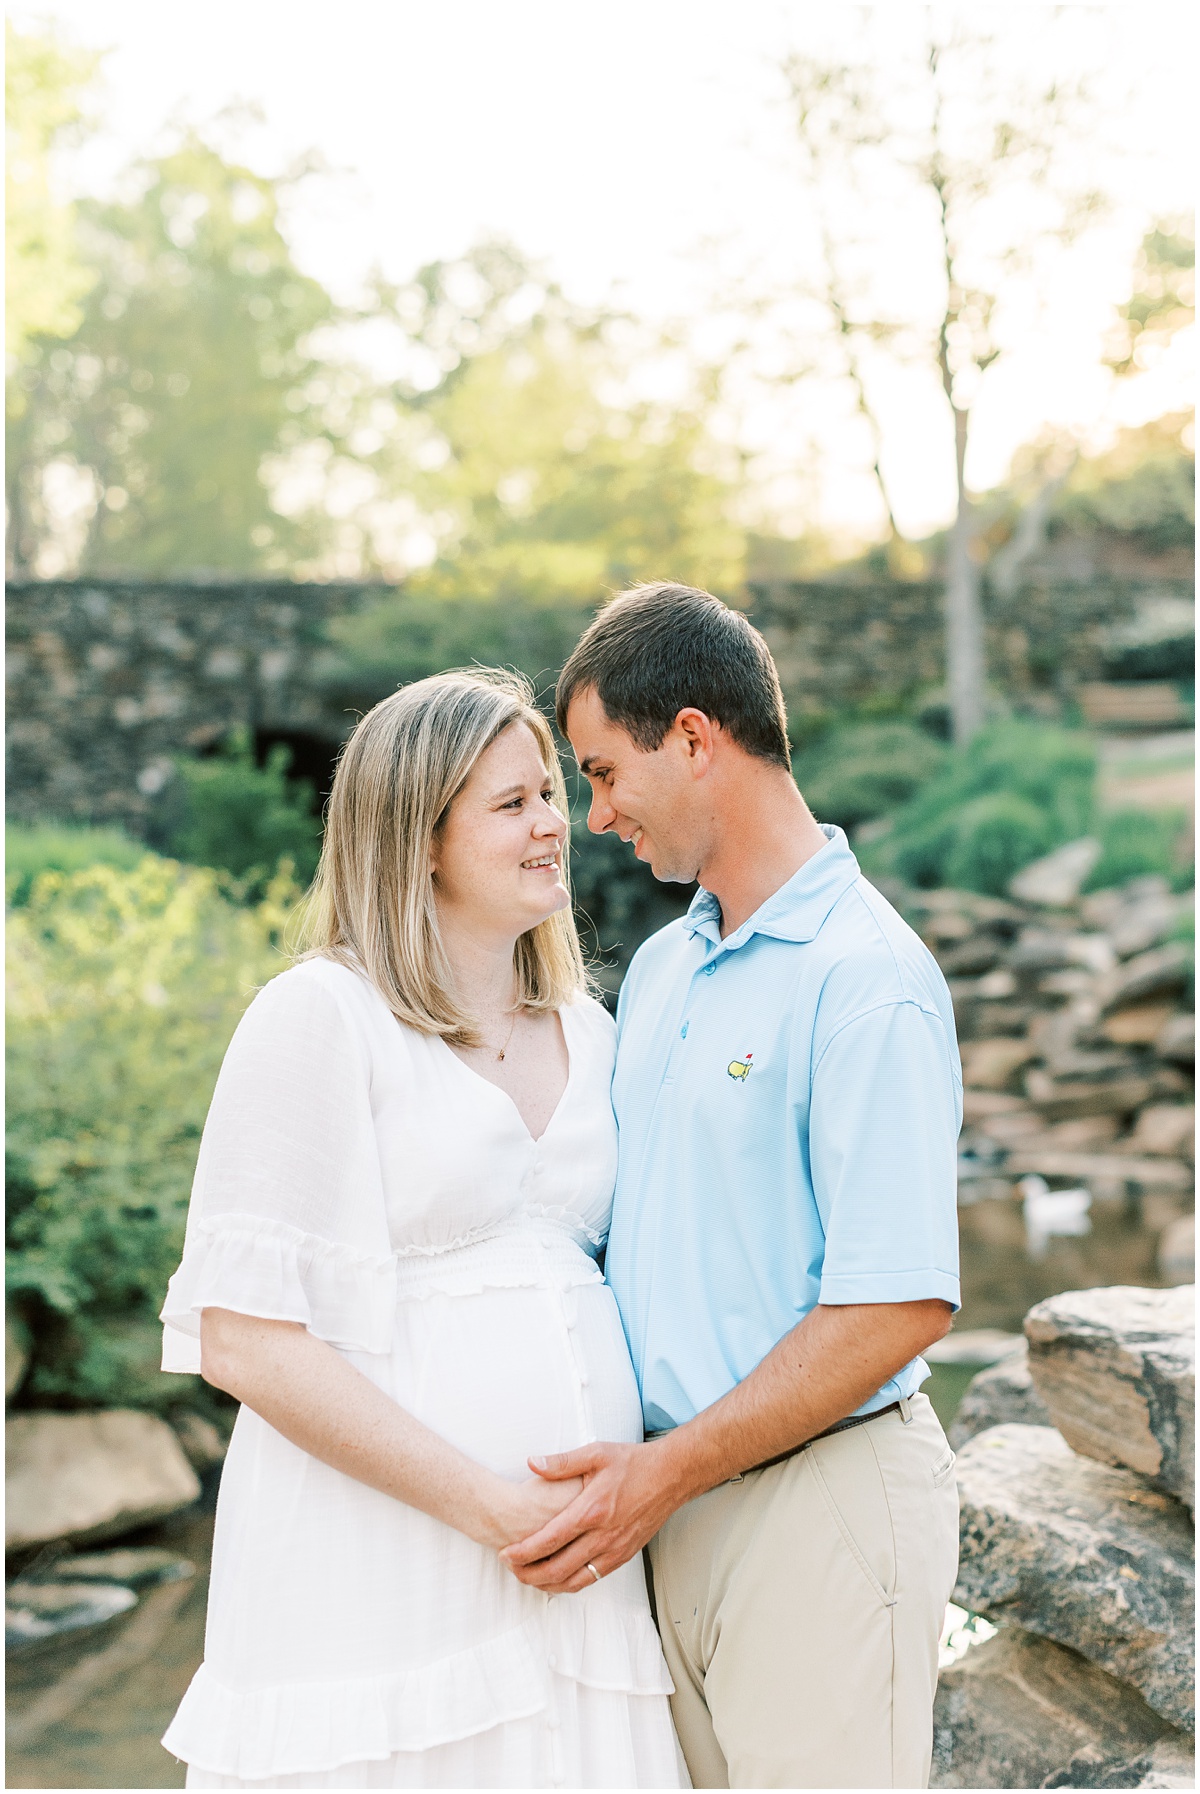 Maternity photography in Greenville SC